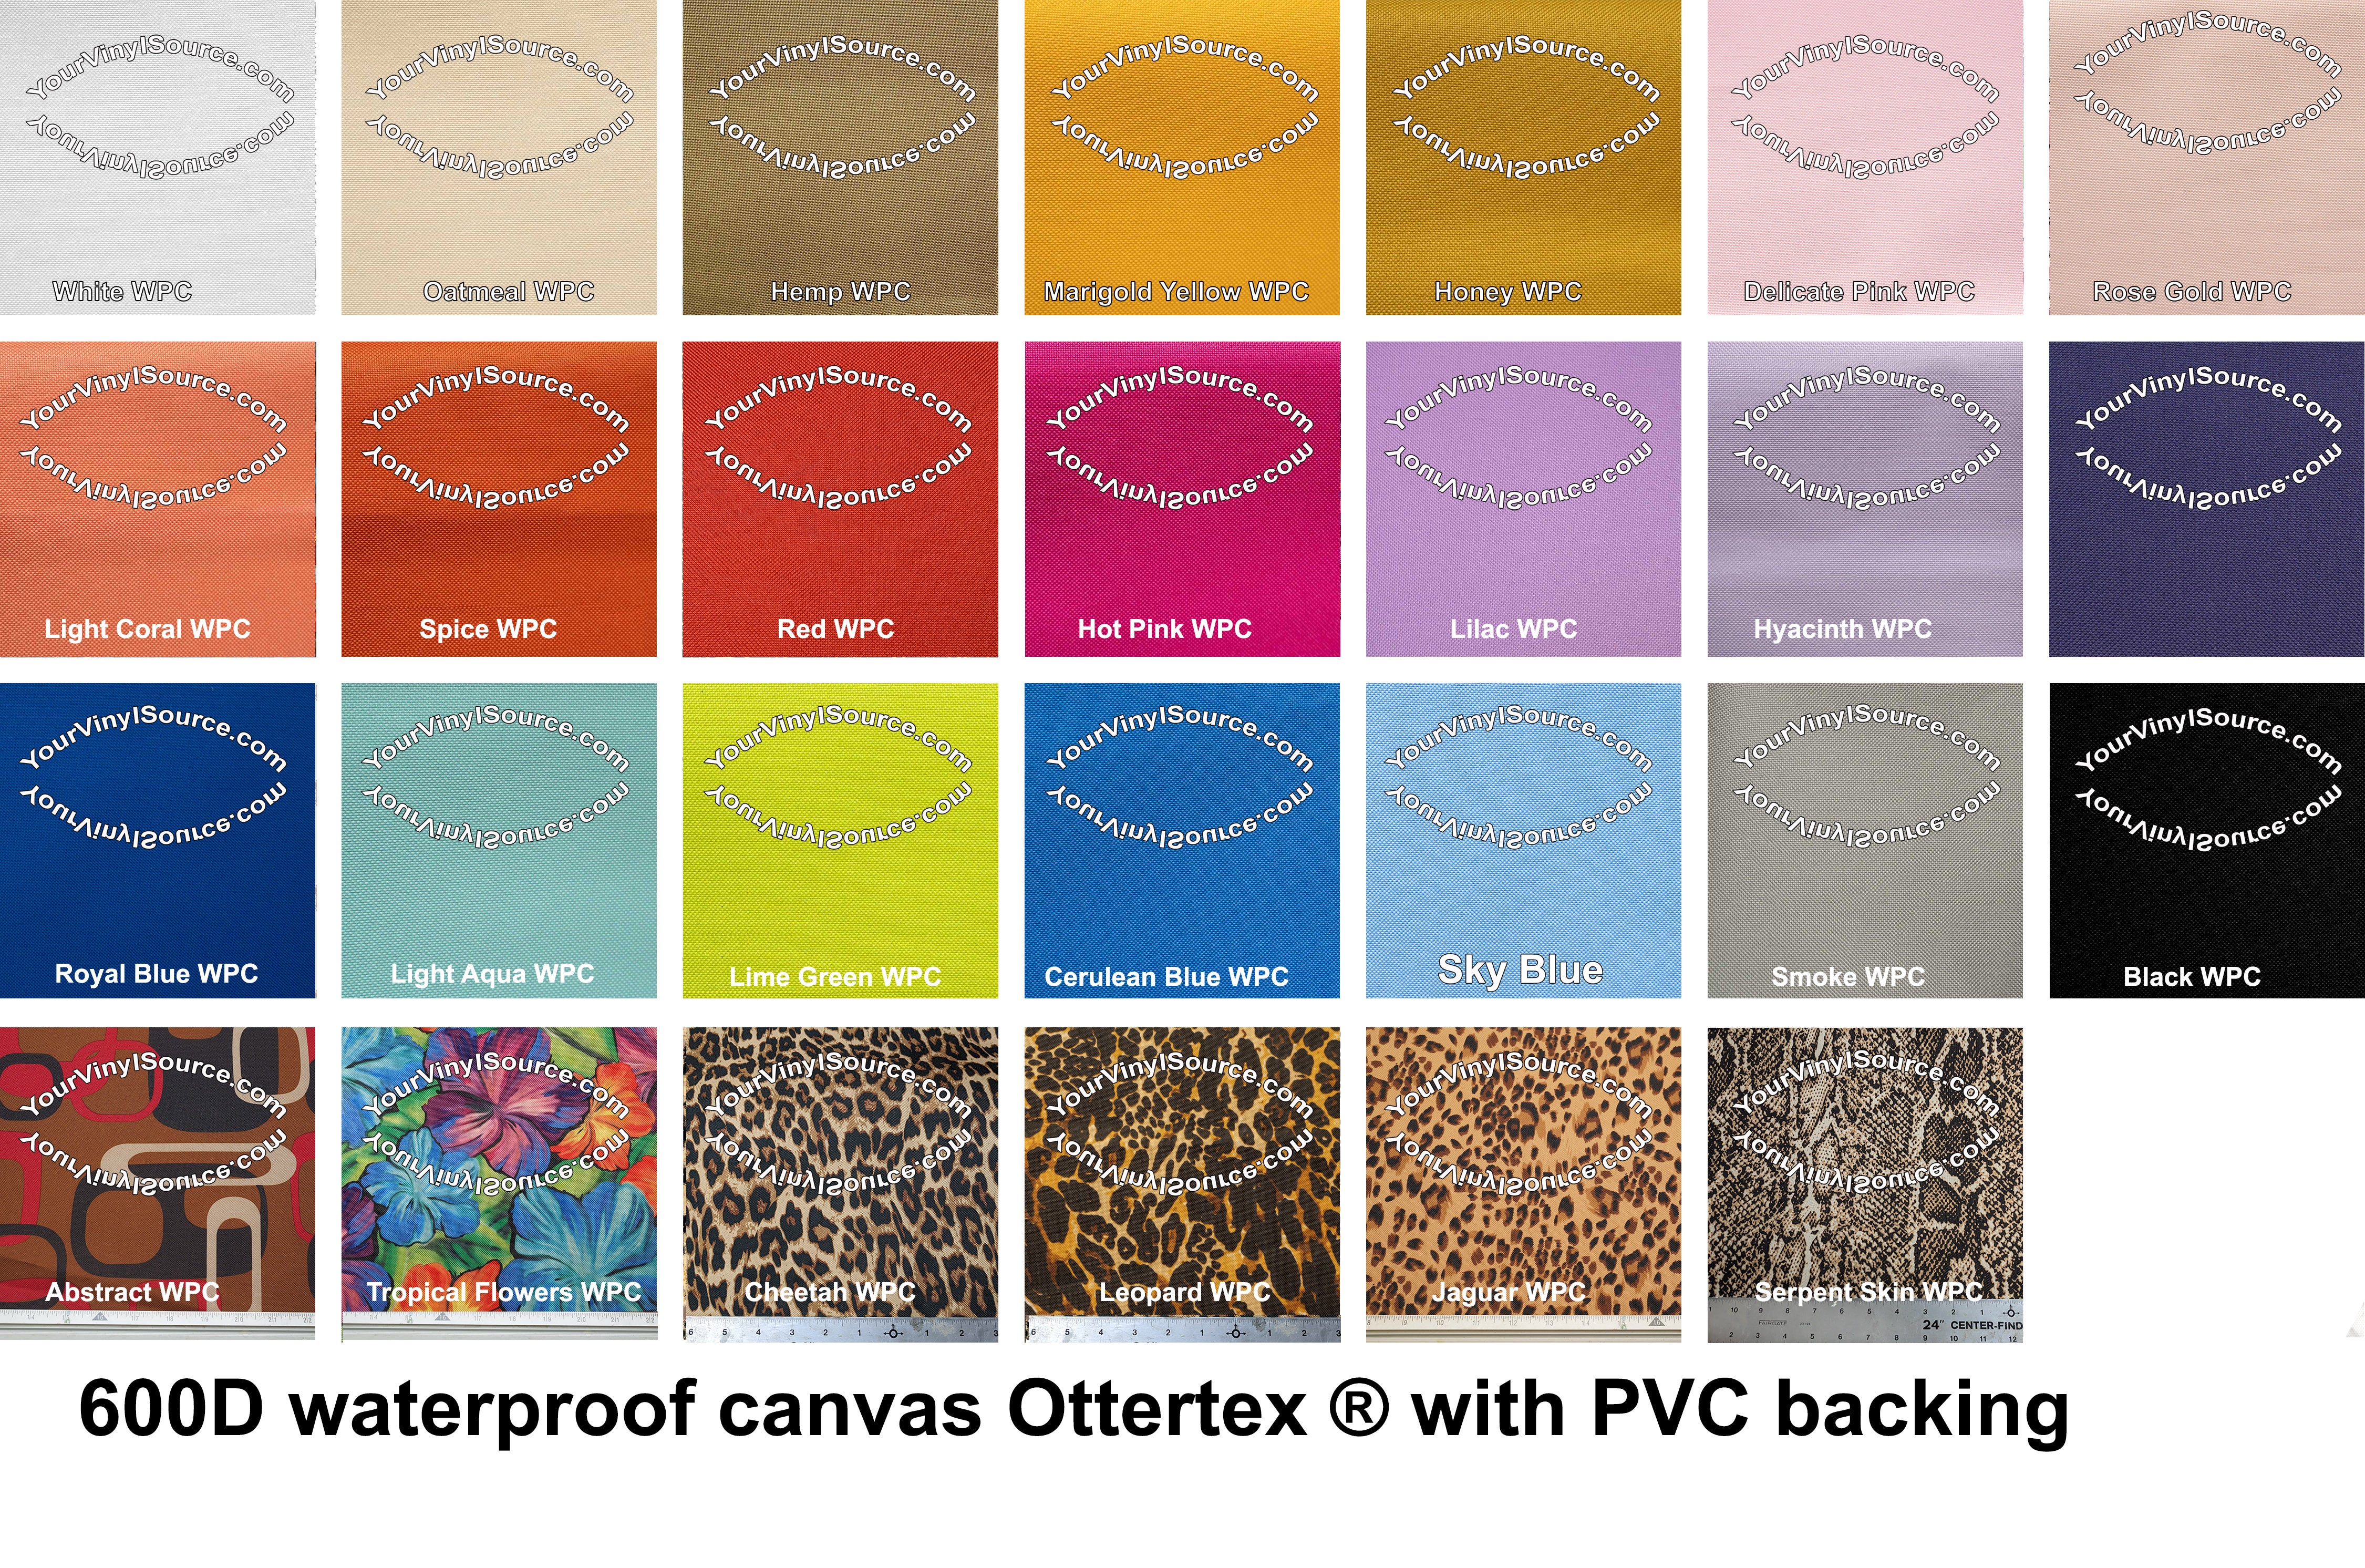 Fabric Wholesale Direct Ottertex Waterproof Canvas - Labyrinth Print Fabric - Yard Many Colors Available